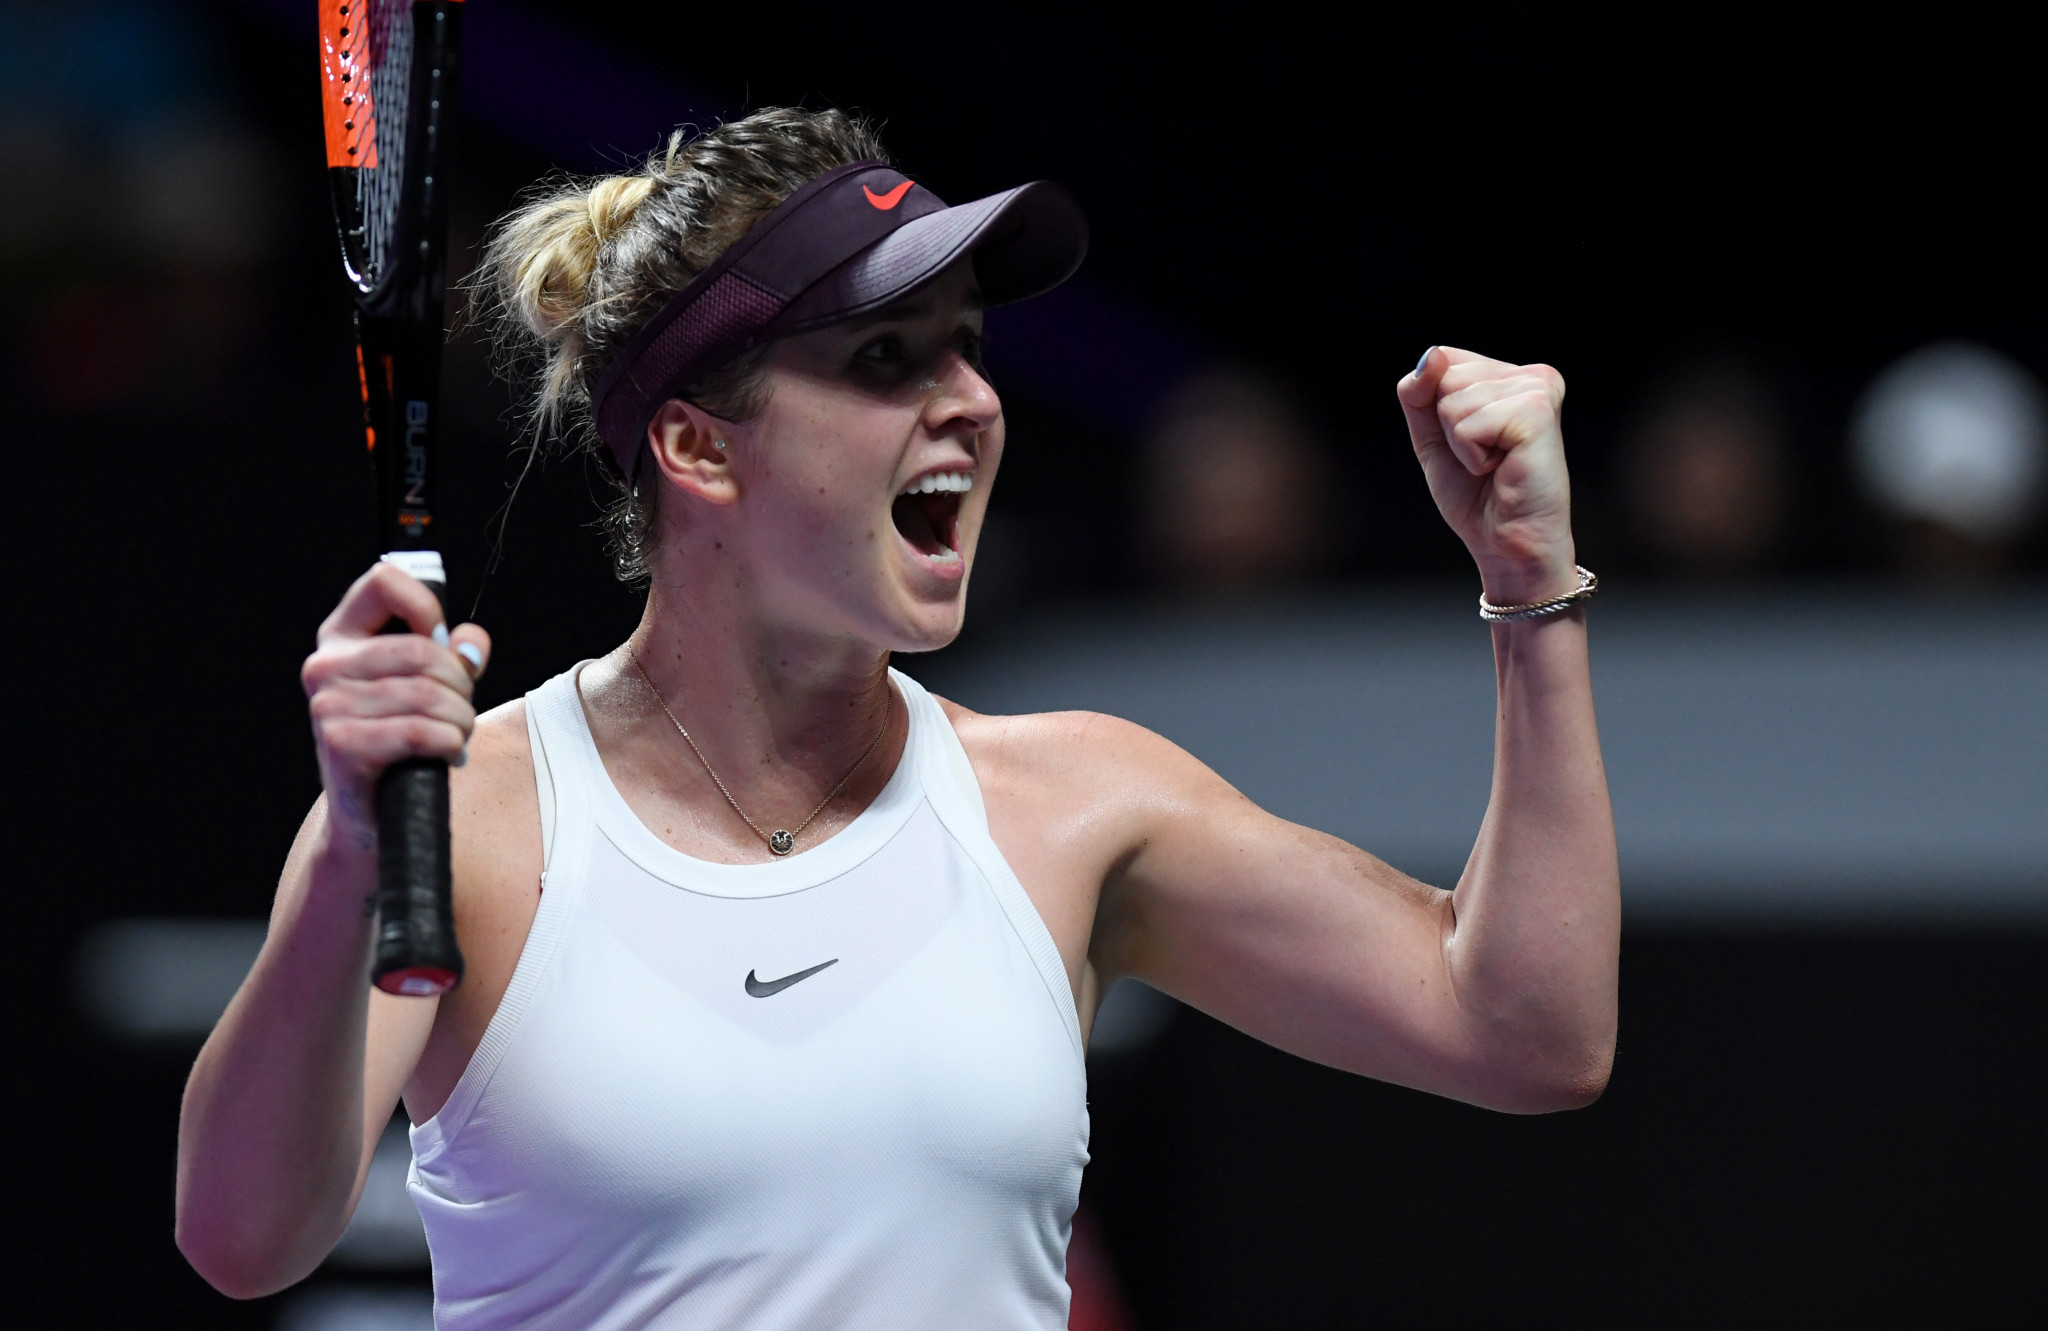 Elina Svitolina is the first player through to the last four ©Getty Images